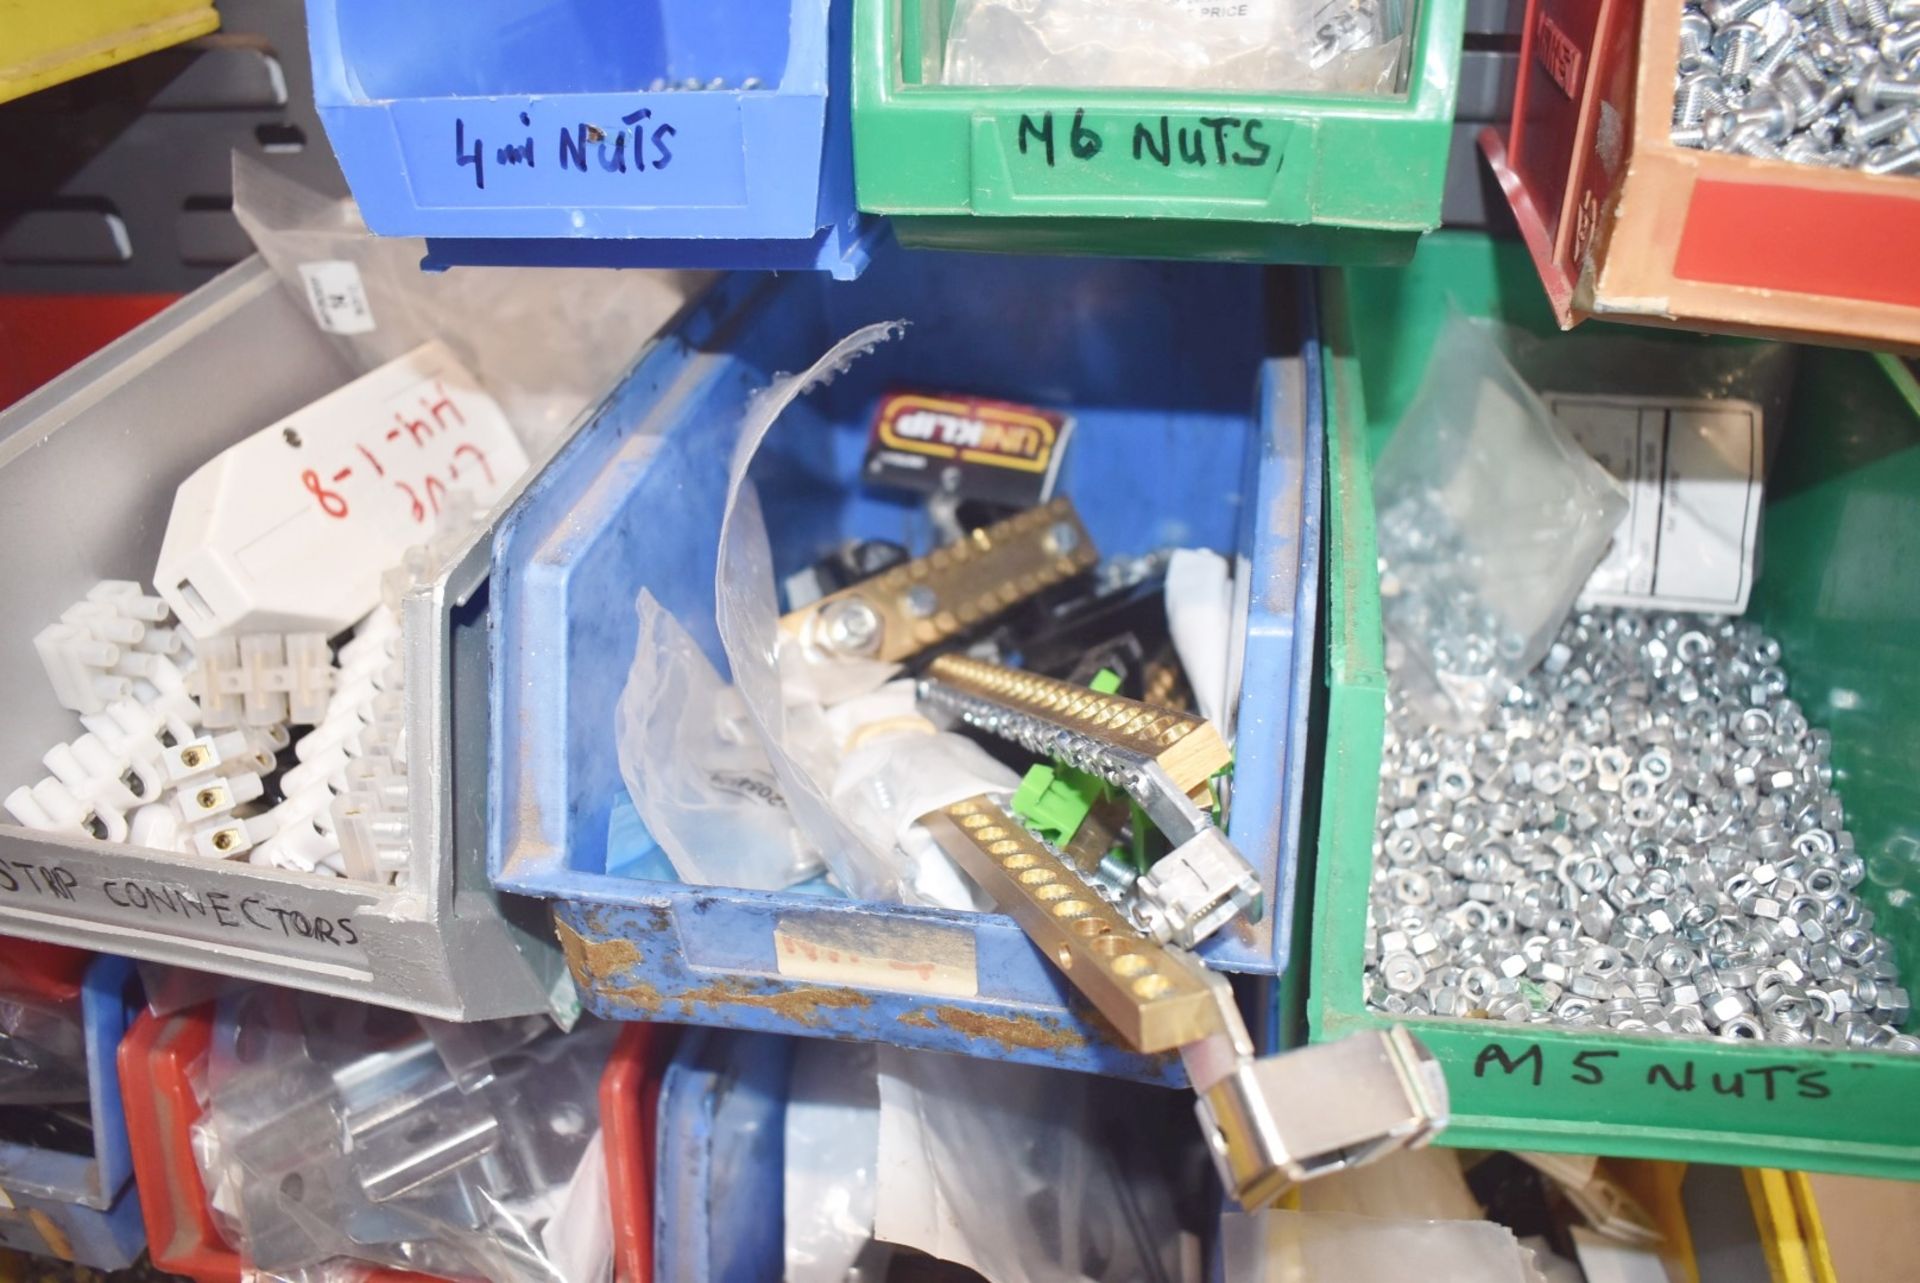 40 x Linbins With Contents - Screws, Nuts, Washes, Fixing Brackets, Strip Connects, Fuses and More - Image 12 of 24